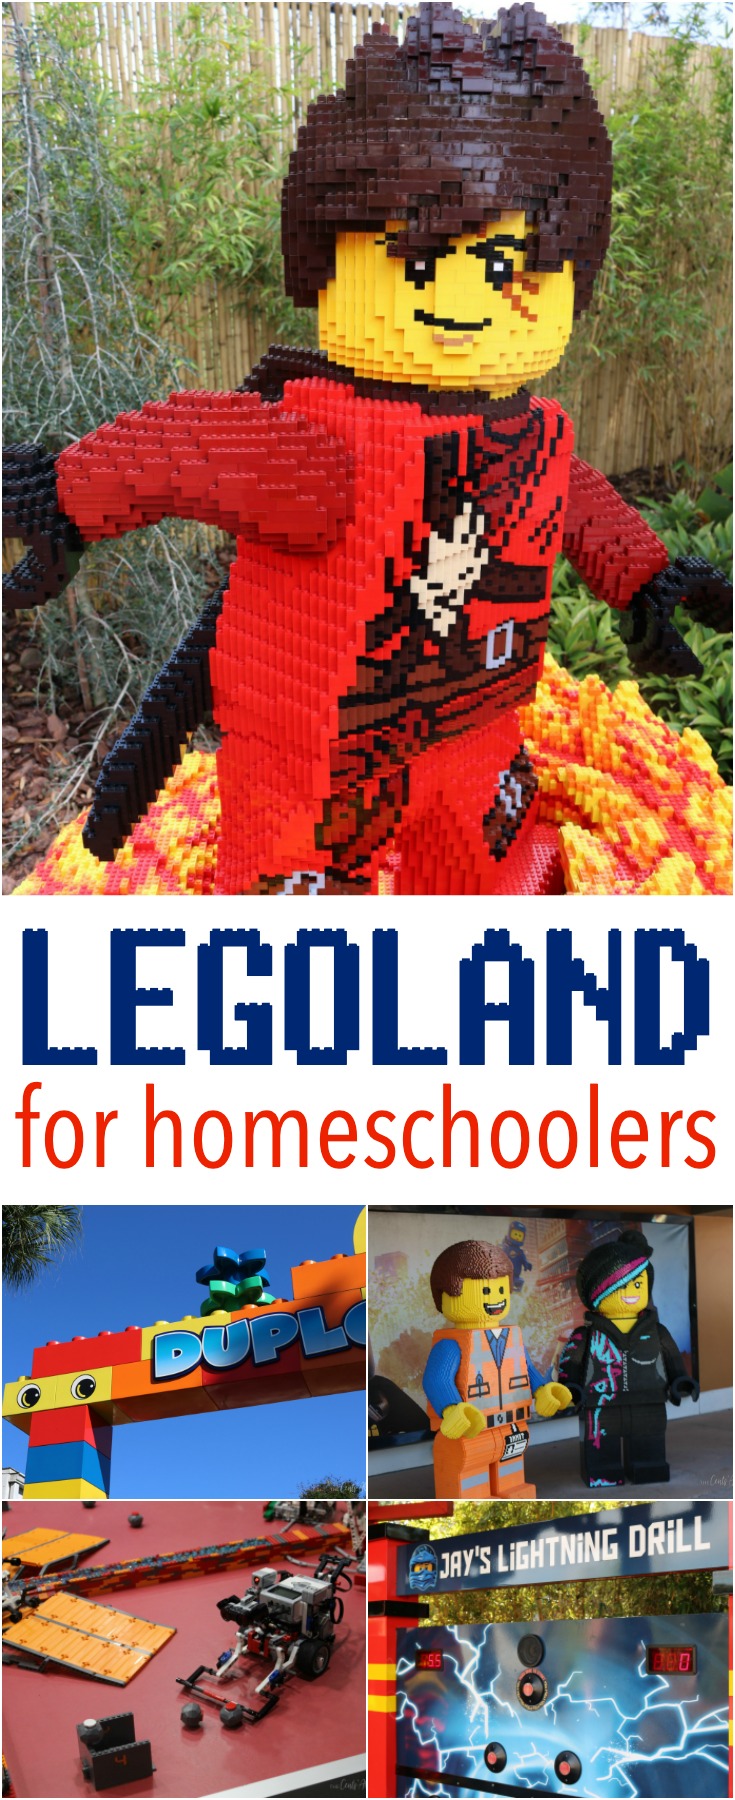 There are many reasons for homeschoolers to visit LEGOLAND. See our tips for visiting LEGOLAND Florida for homeschool families... from tickets to educational opportunities and more. #homeschool #legoland #kids #trip #roadtrip